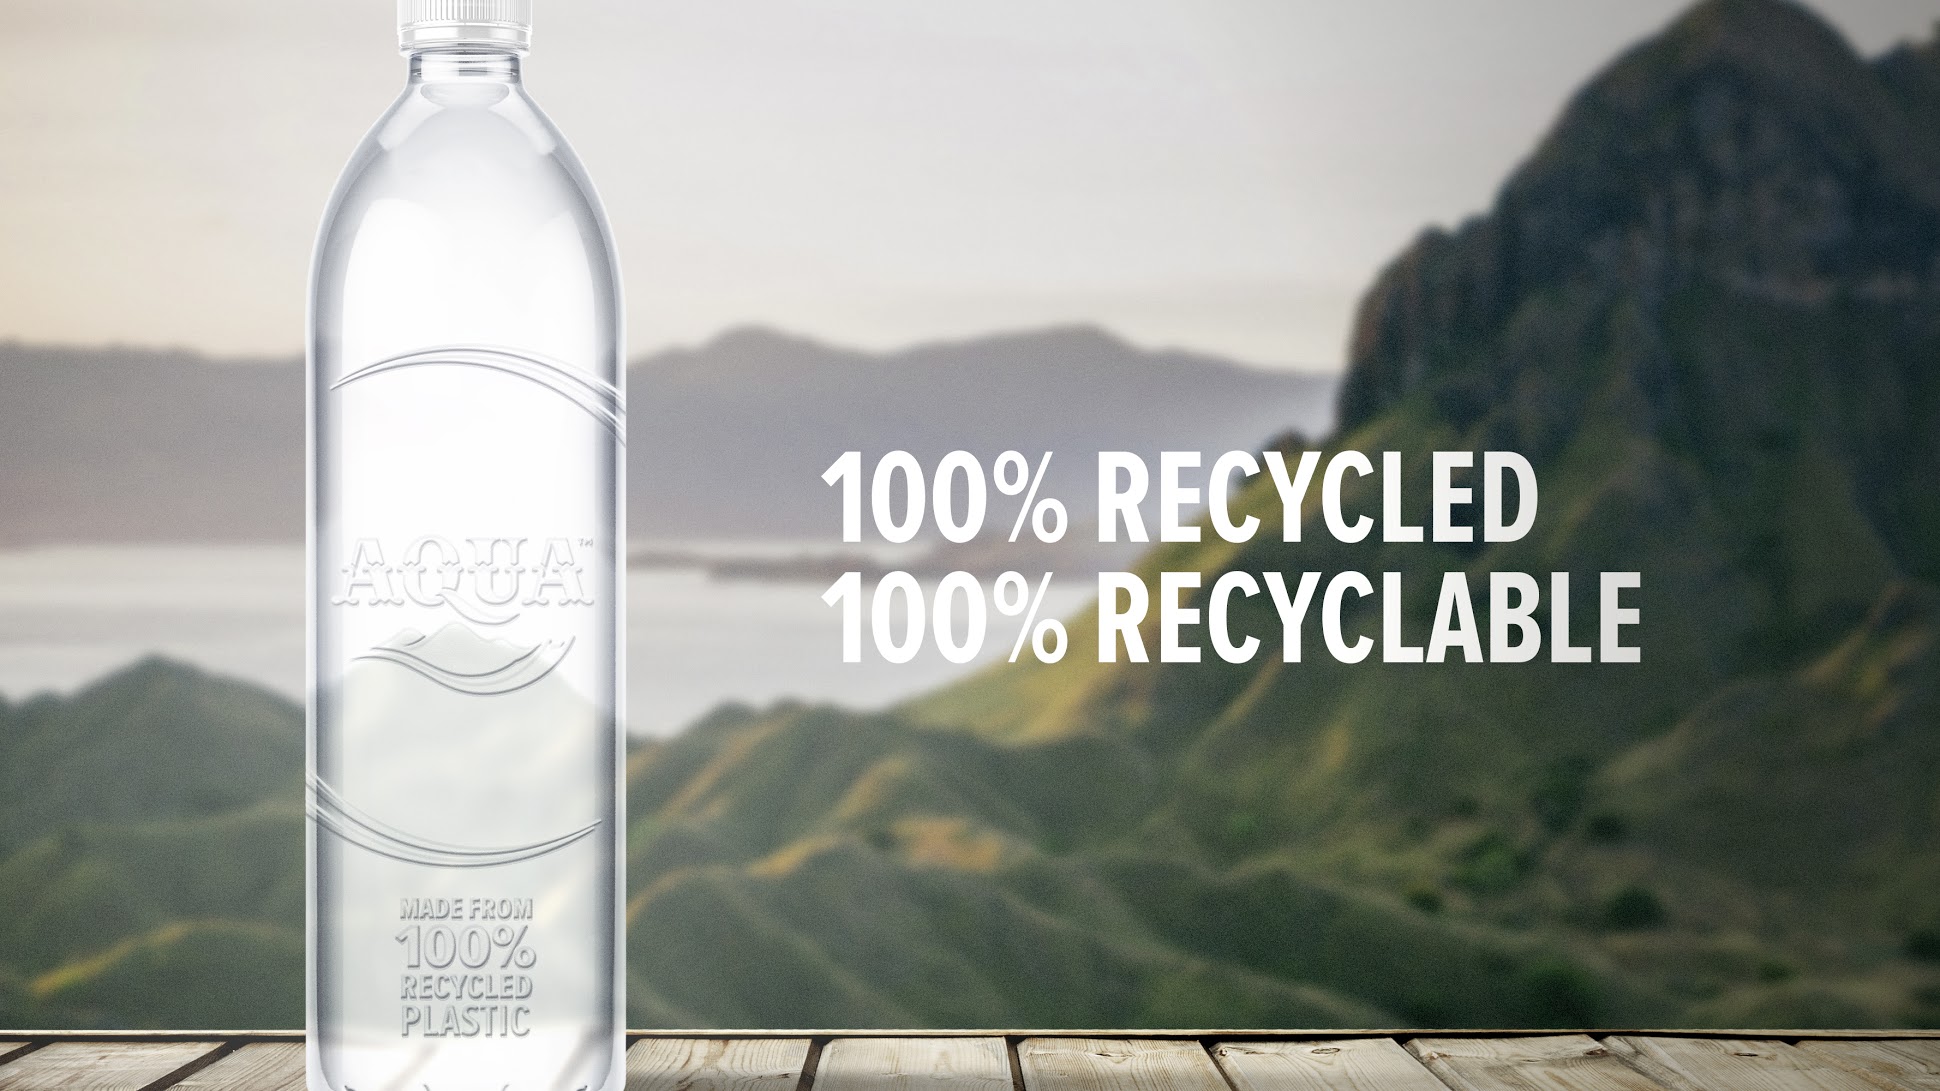 Asian Water Giant Launches 100% Recycled Plastic Edition | everland.dk